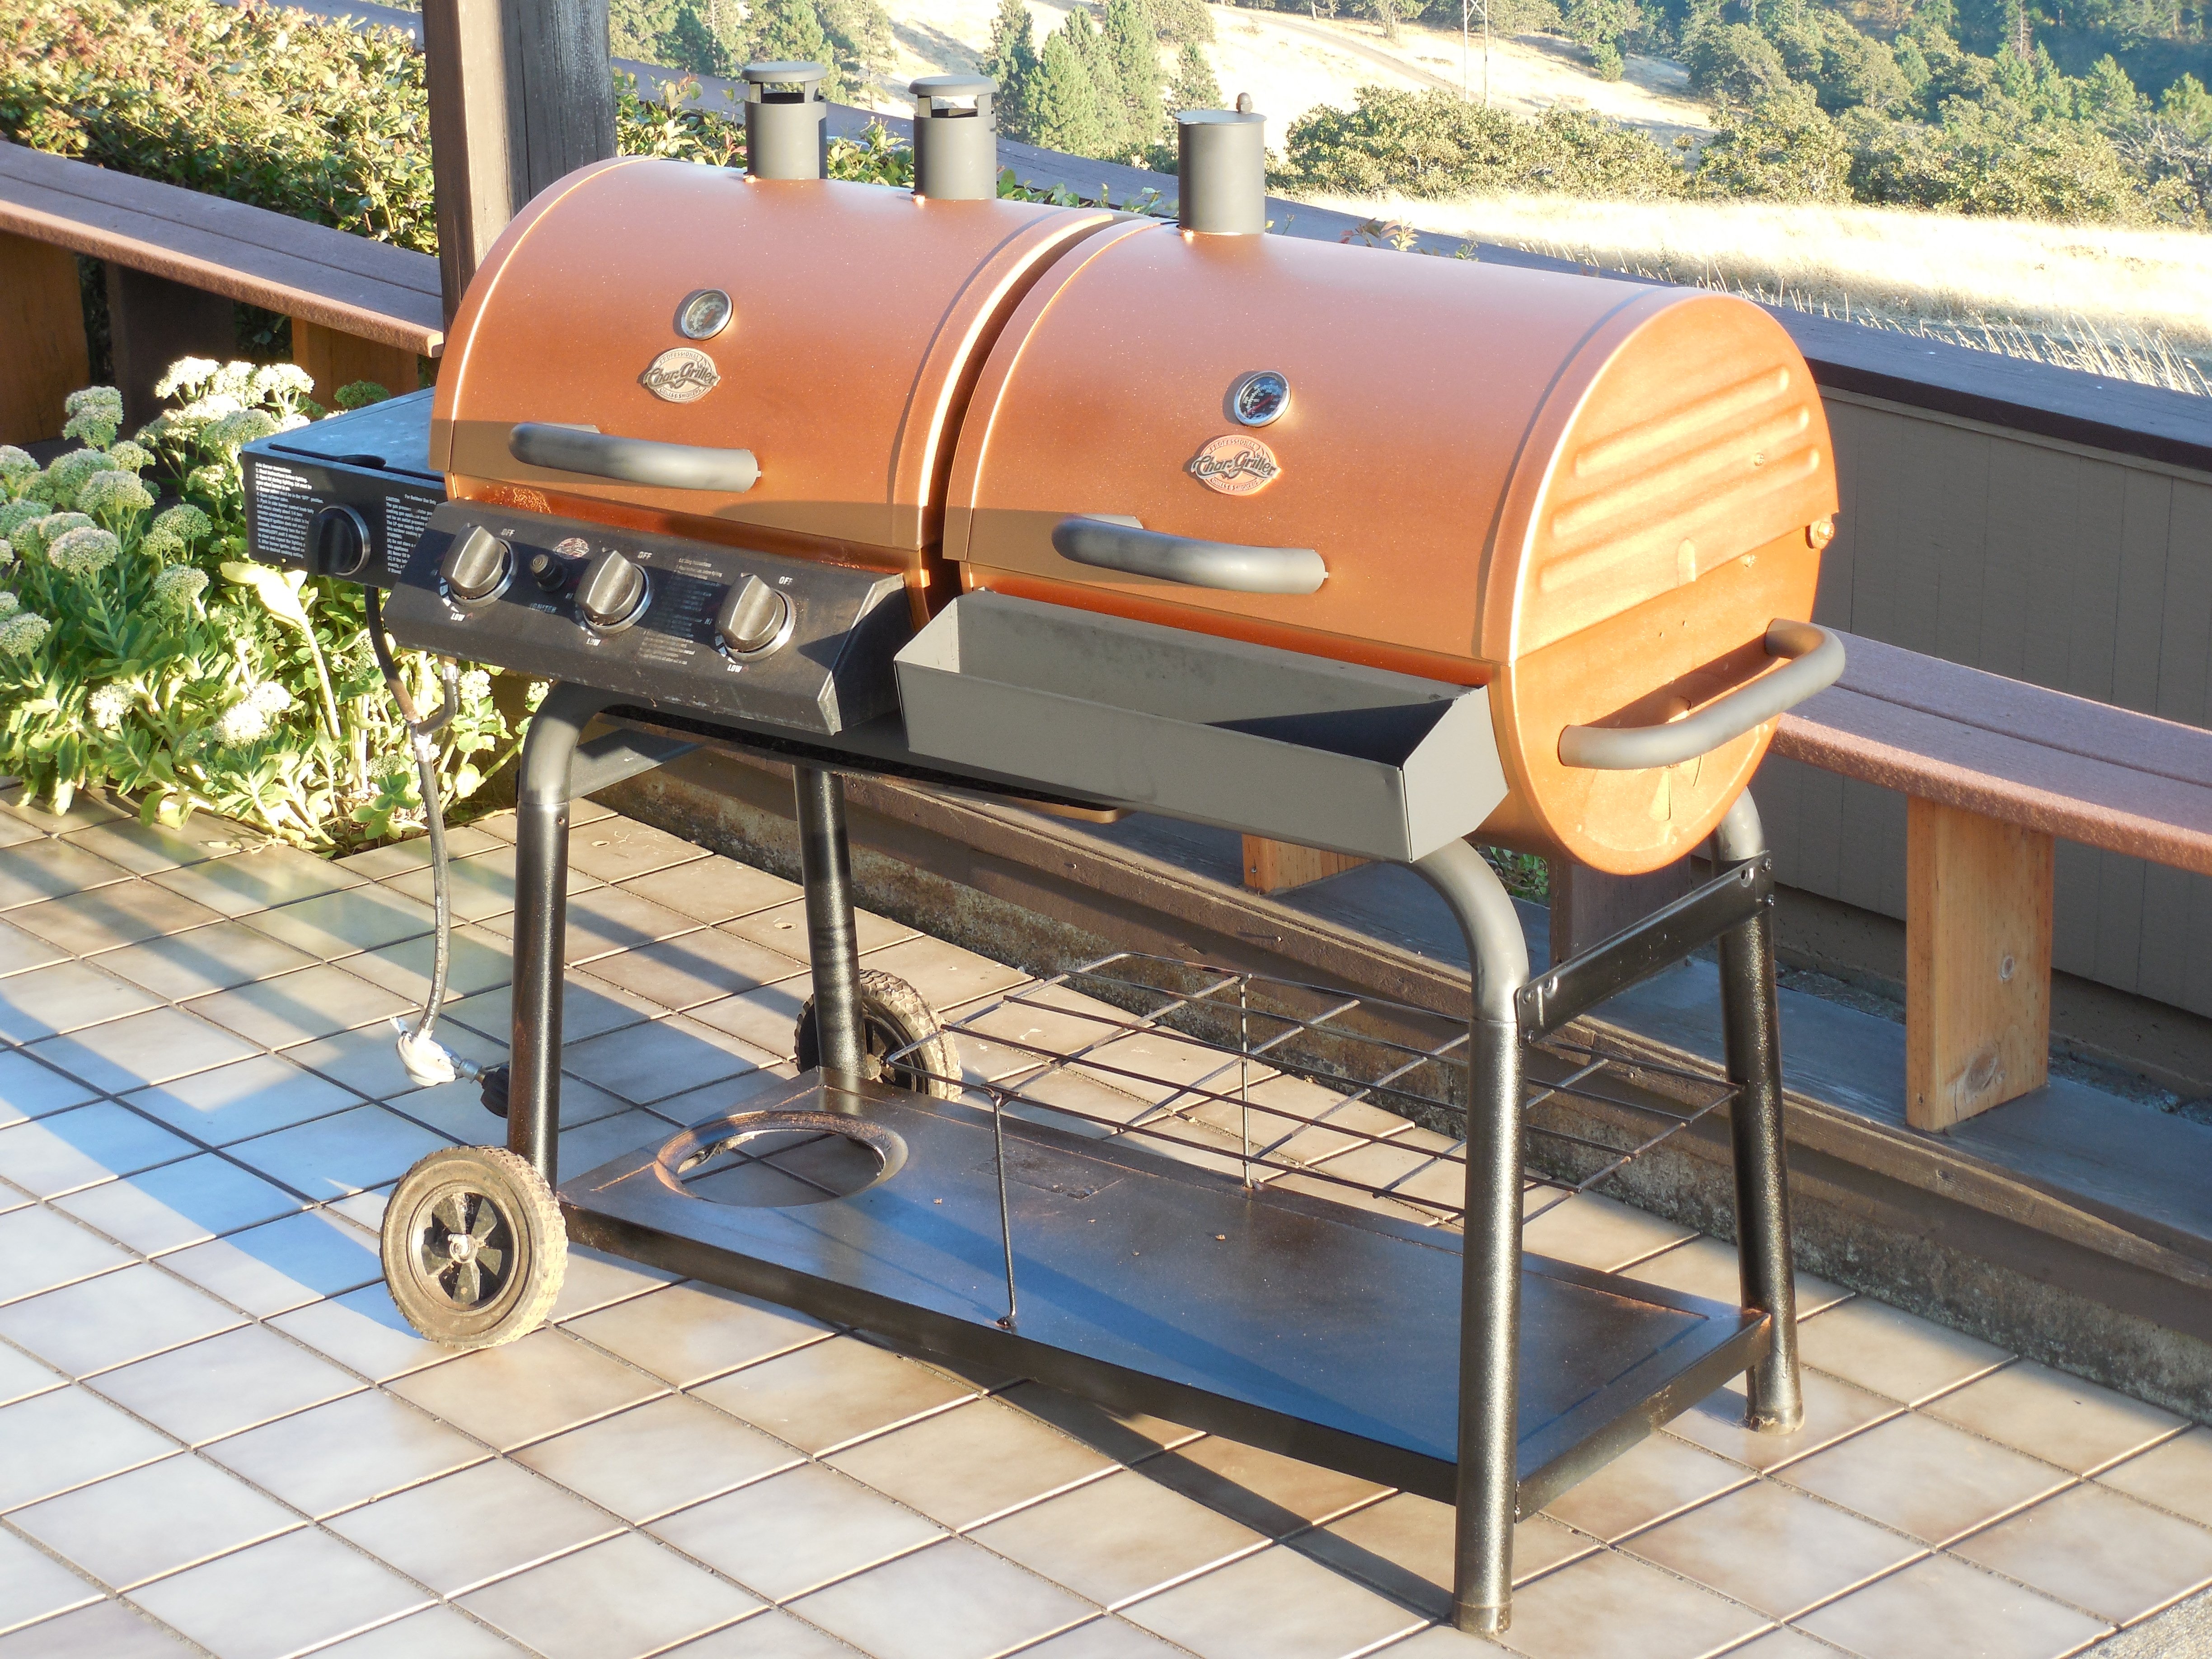 A barbeque repainted a fun color with high temp bbq paint